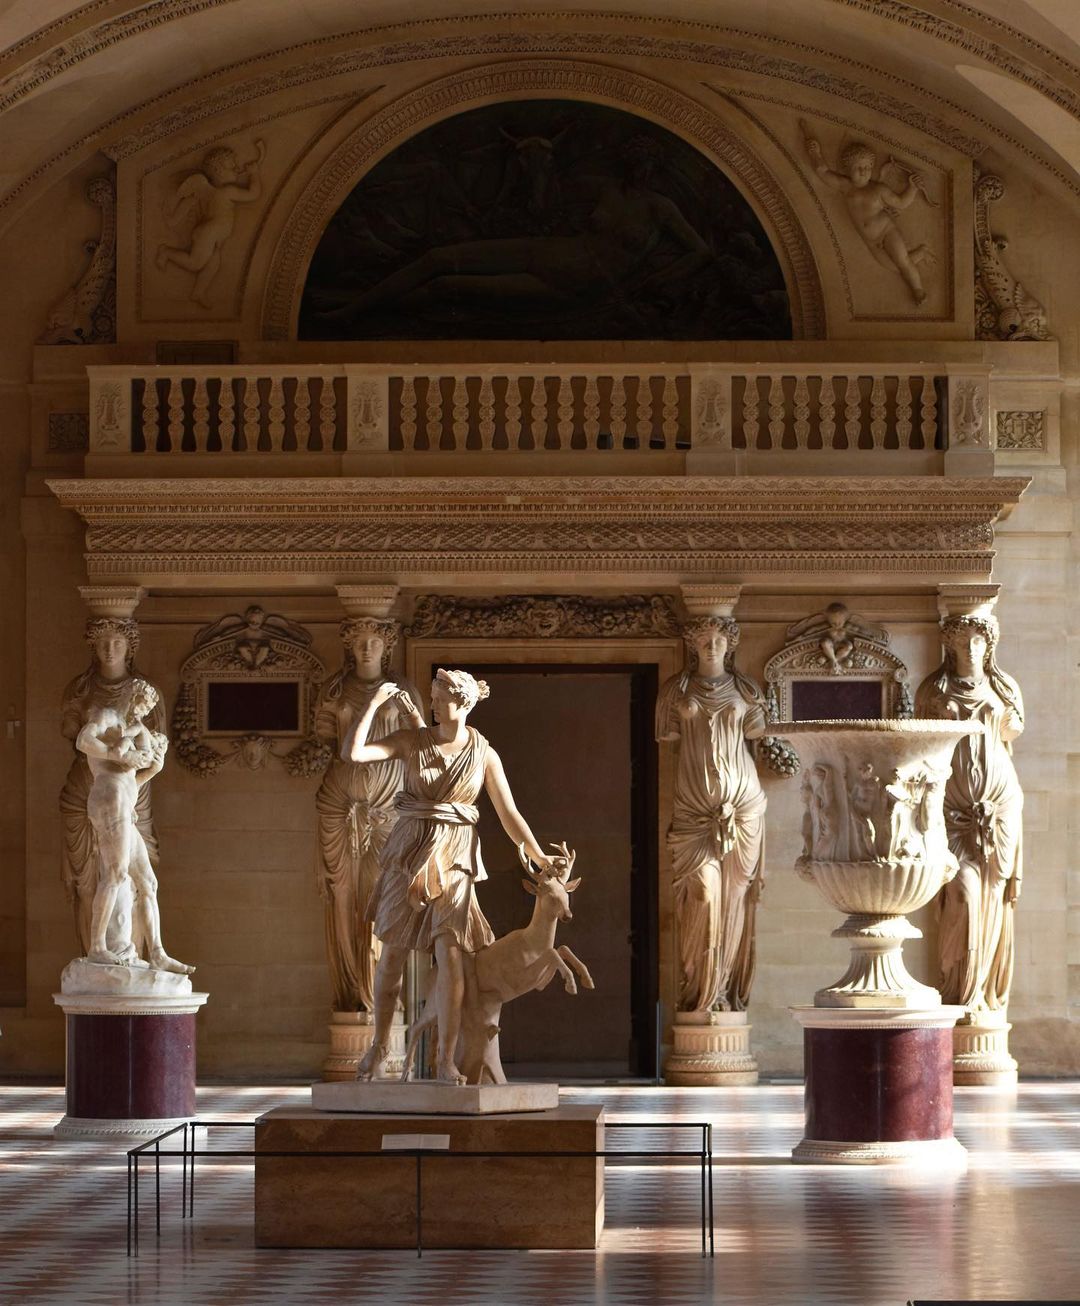 The "Diana of Versailles" inside the Louvre's gorgeous interiors